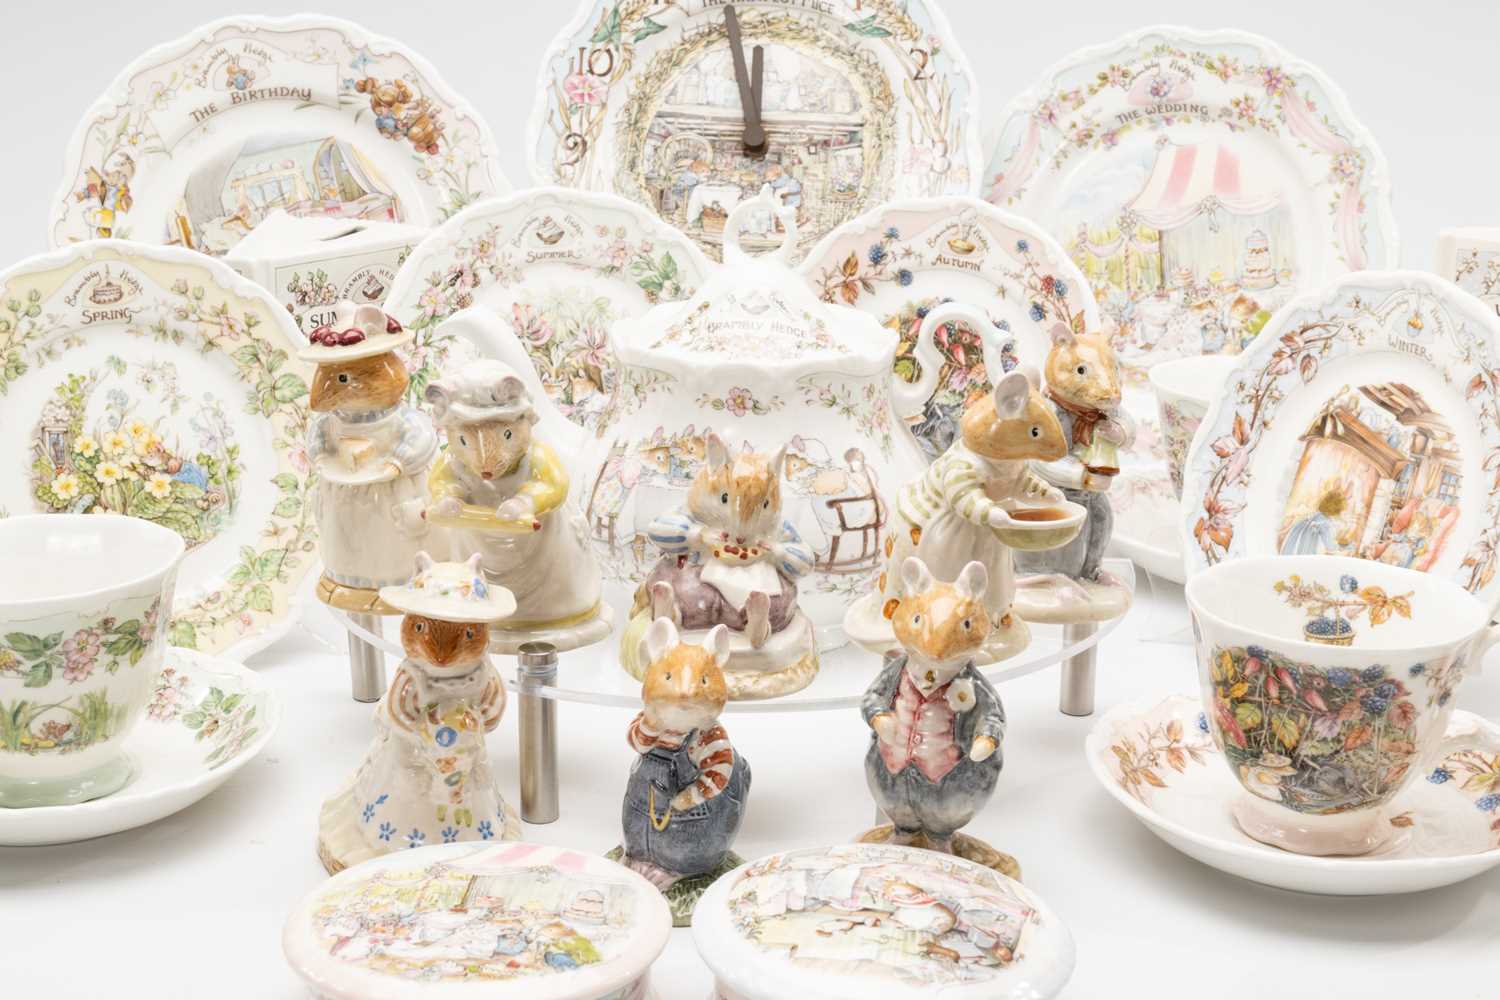 ASSORTED ROYAL DOULTON 'BRAMBLY HEDGE' BONE CHINA TEAWARES & FIGURINES, plates and clock, together - Image 2 of 2